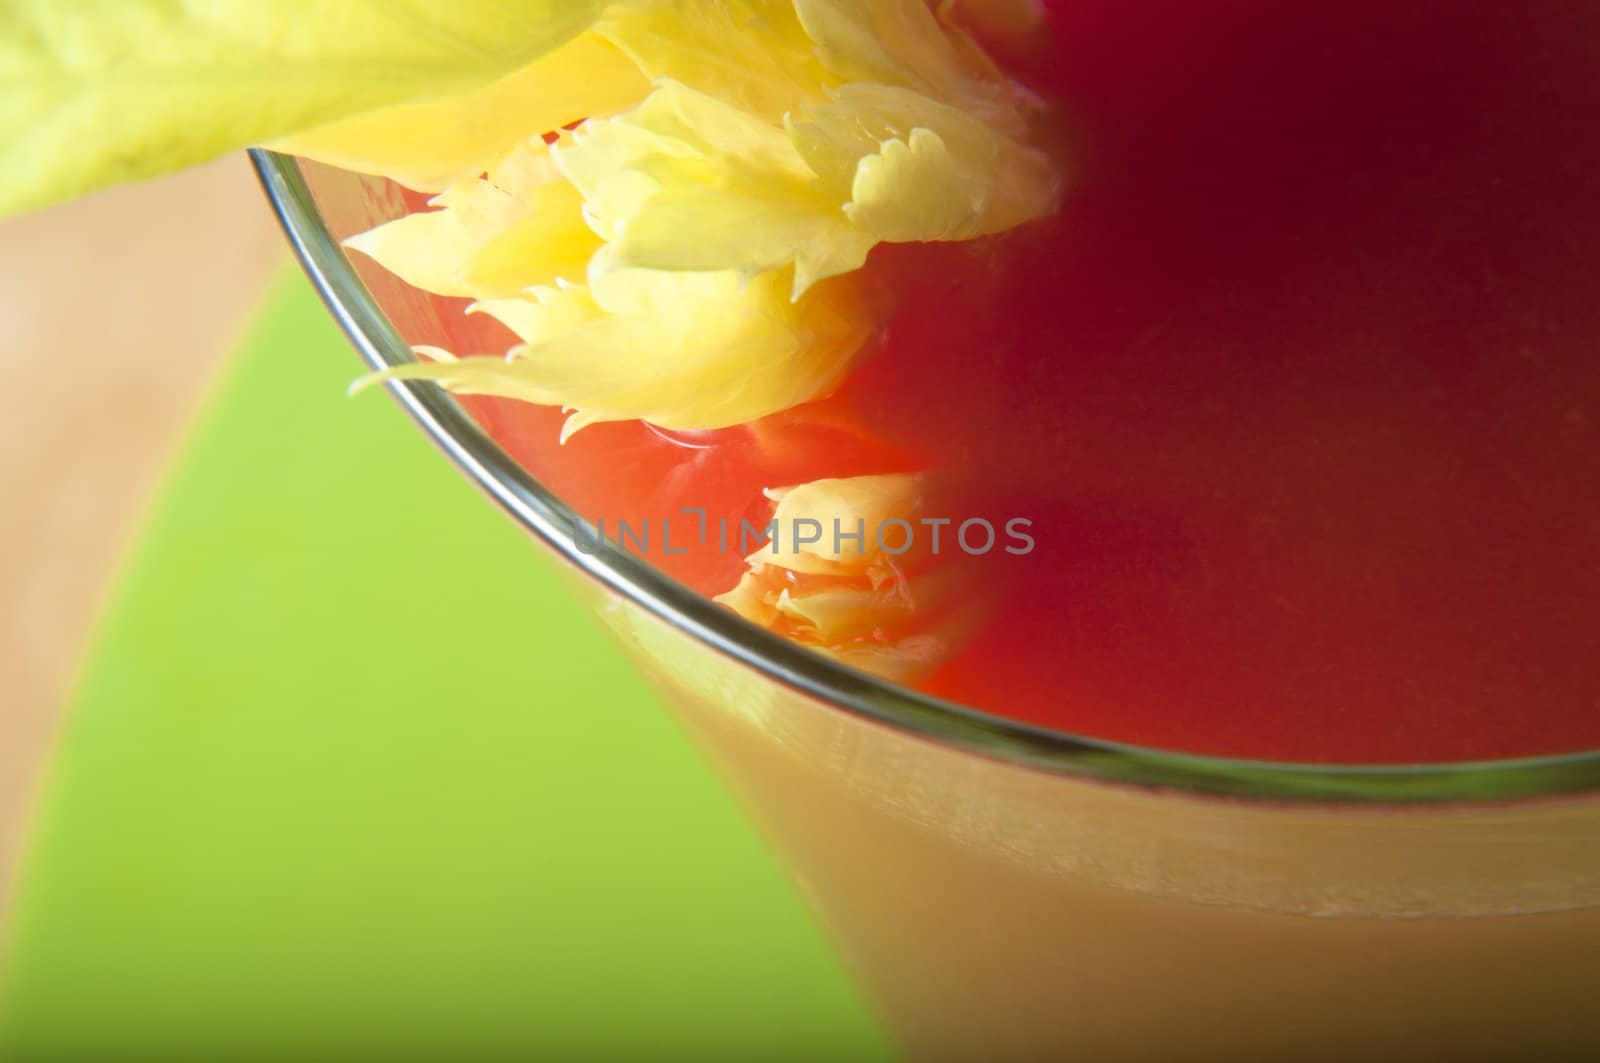 Close up (macro) shot of a glass of tomato juice with celery leaves protruding from it.  Green table mat and wooden table in soft focus.  Shallow depth of field.